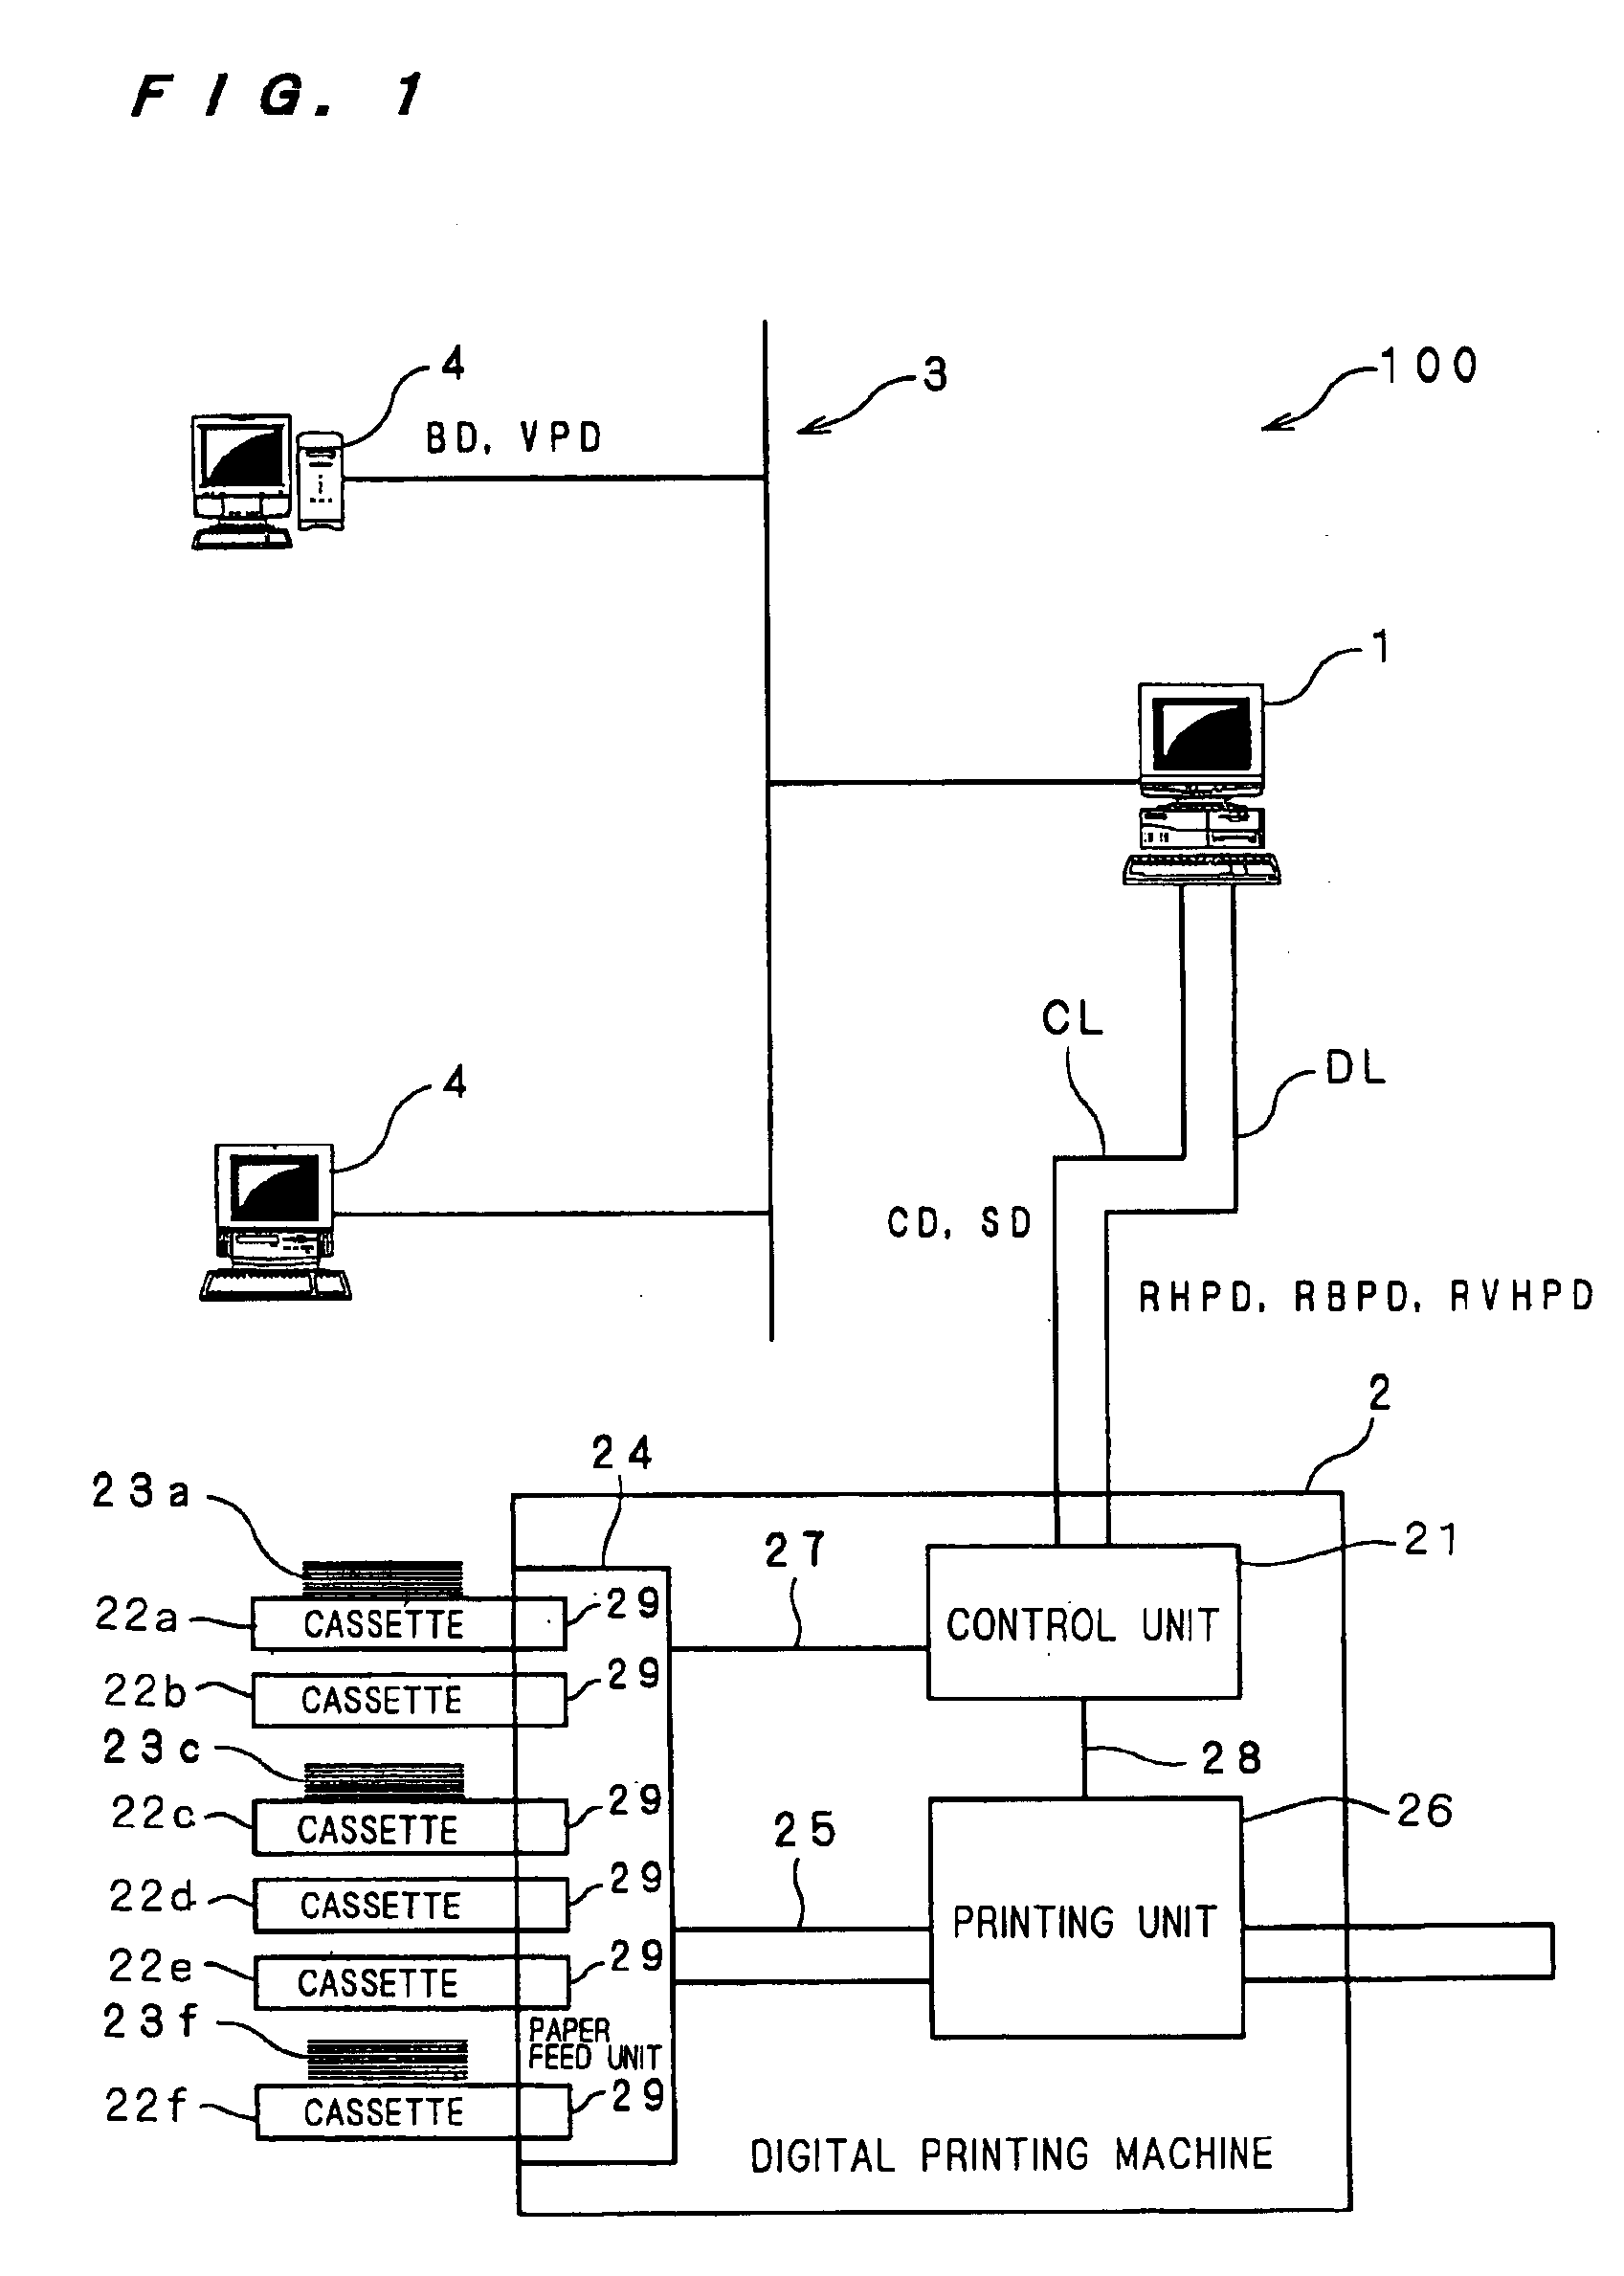 Printing system for bookbinding cover and body portions